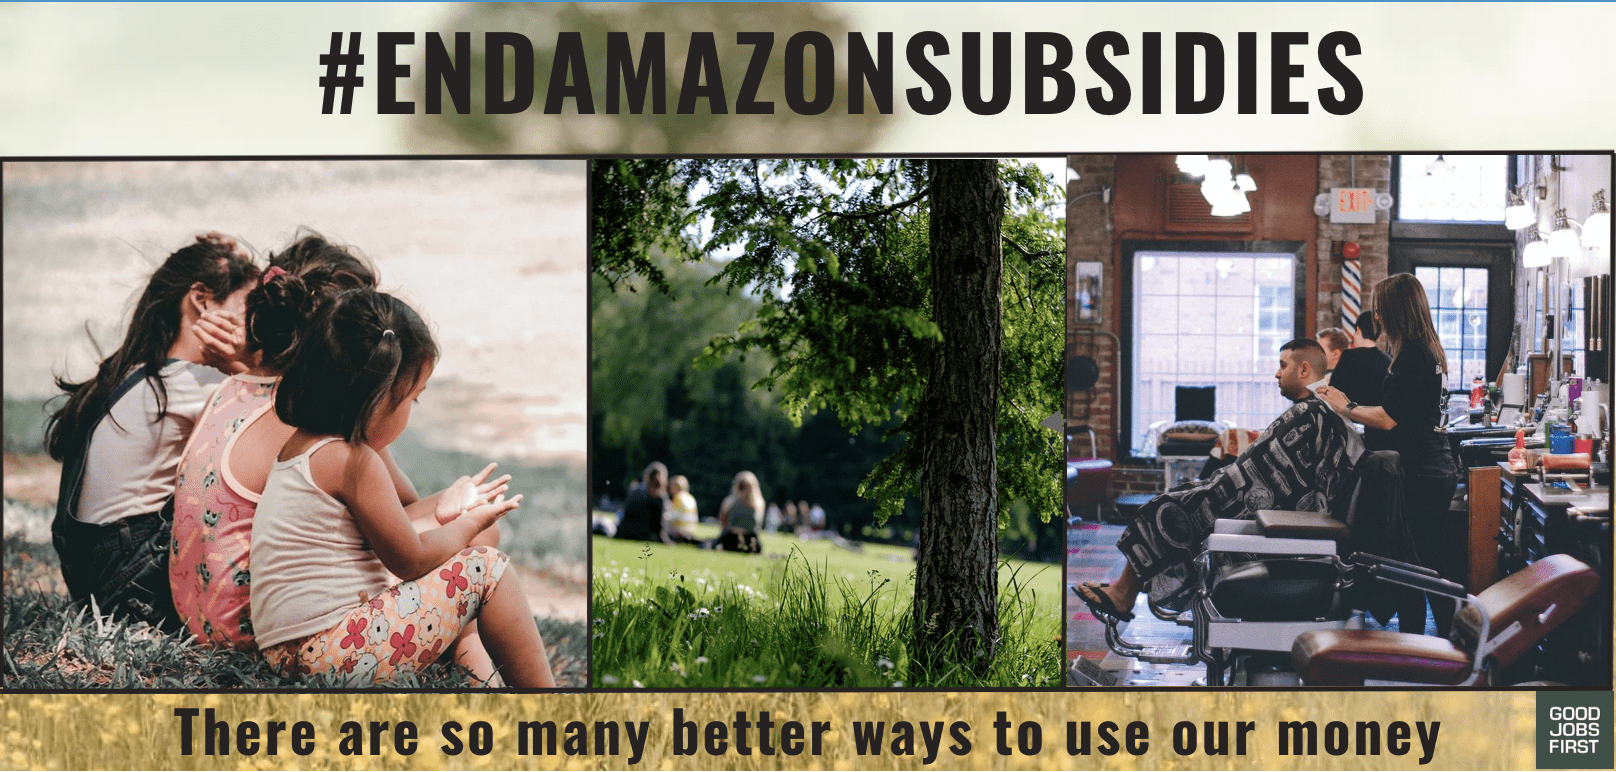 #EndAmazonSubsidies and "There are so many better ways to use our money" is the text. images are three little children sitting downw with their backs facing us, a barbershop and a park.